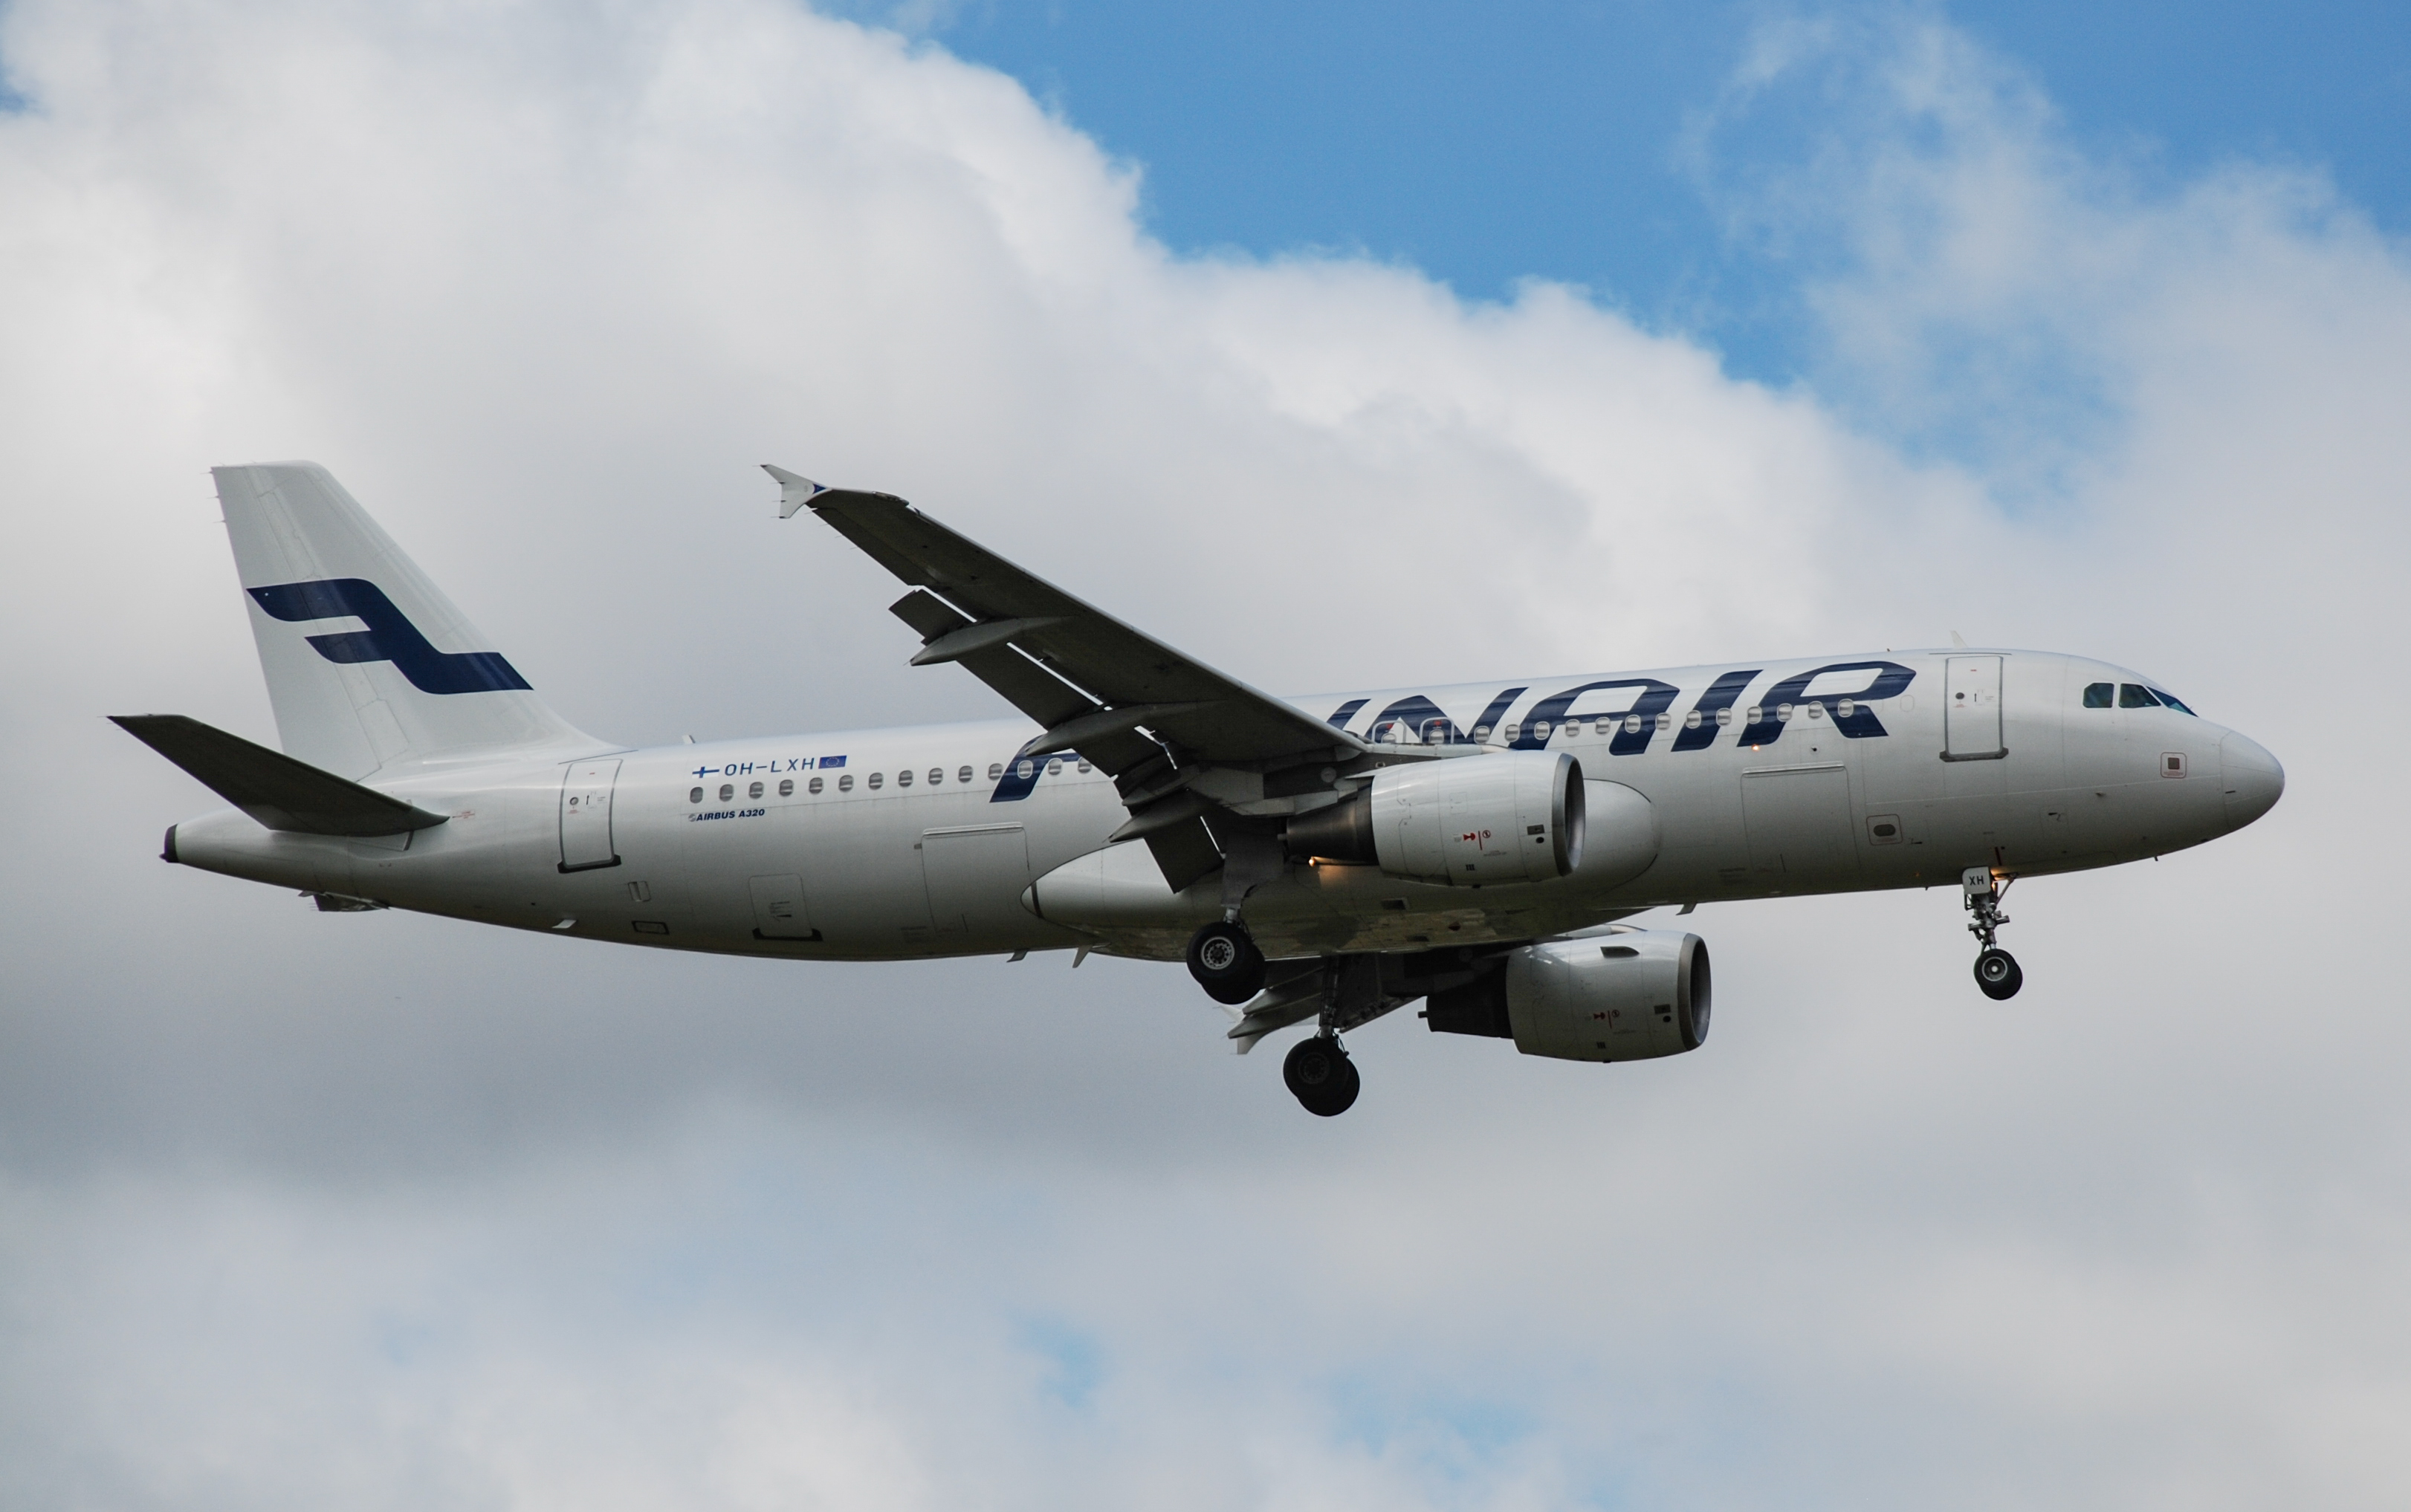 OH-LXH/OHLXH Finnair Airbus A320 Airframe Information - AVSpotters.com